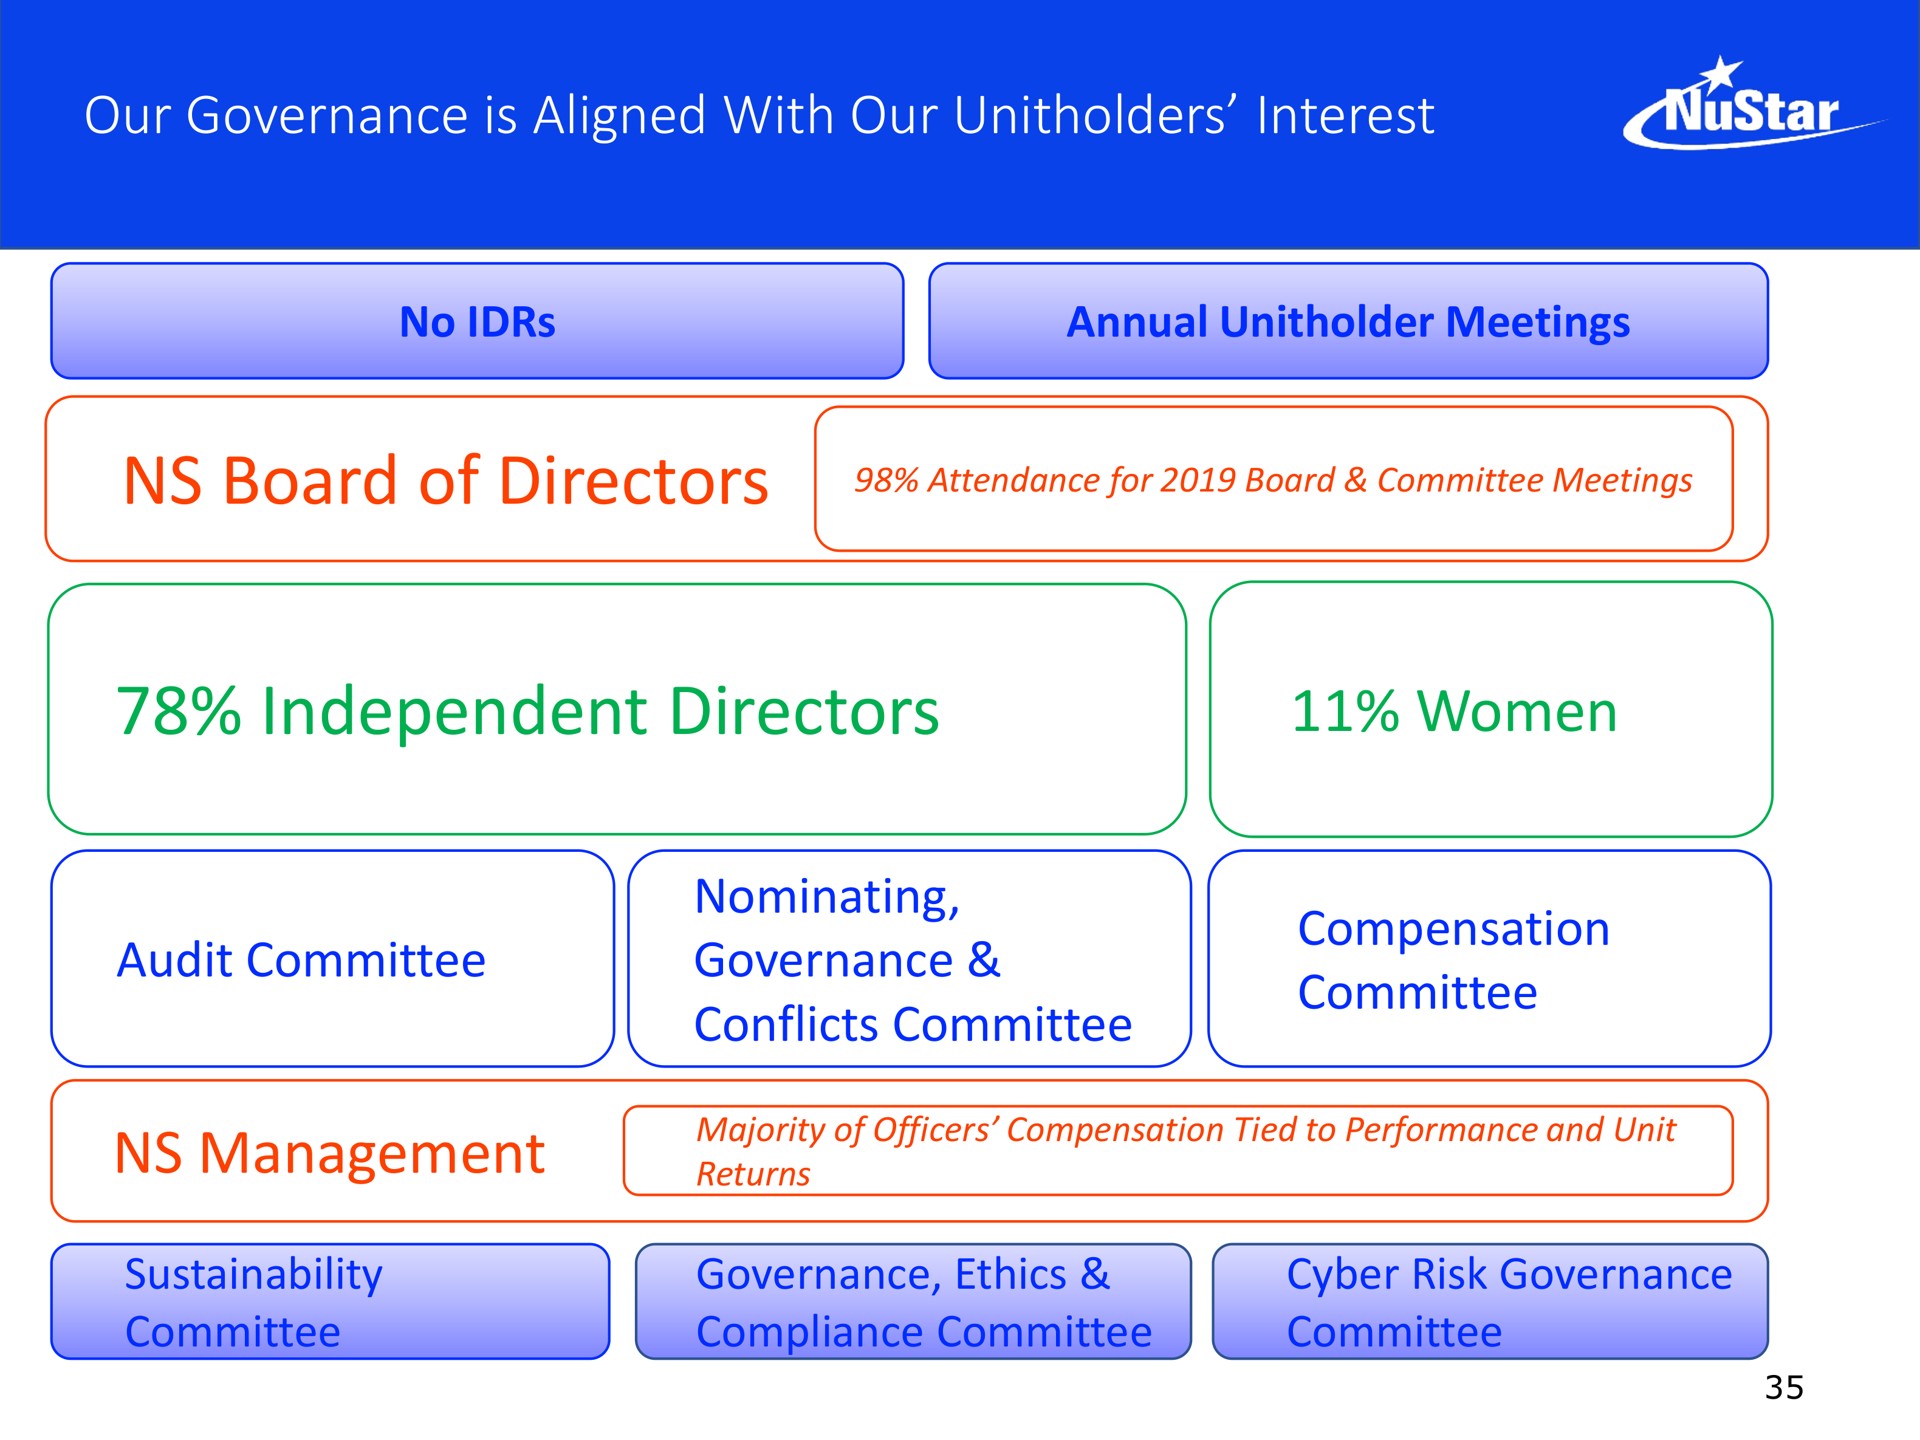 our governance is aligned with our interest board of directors independent directors women audit committee nominating governance conflicts committee compensation committee management ire | NuStar Energy